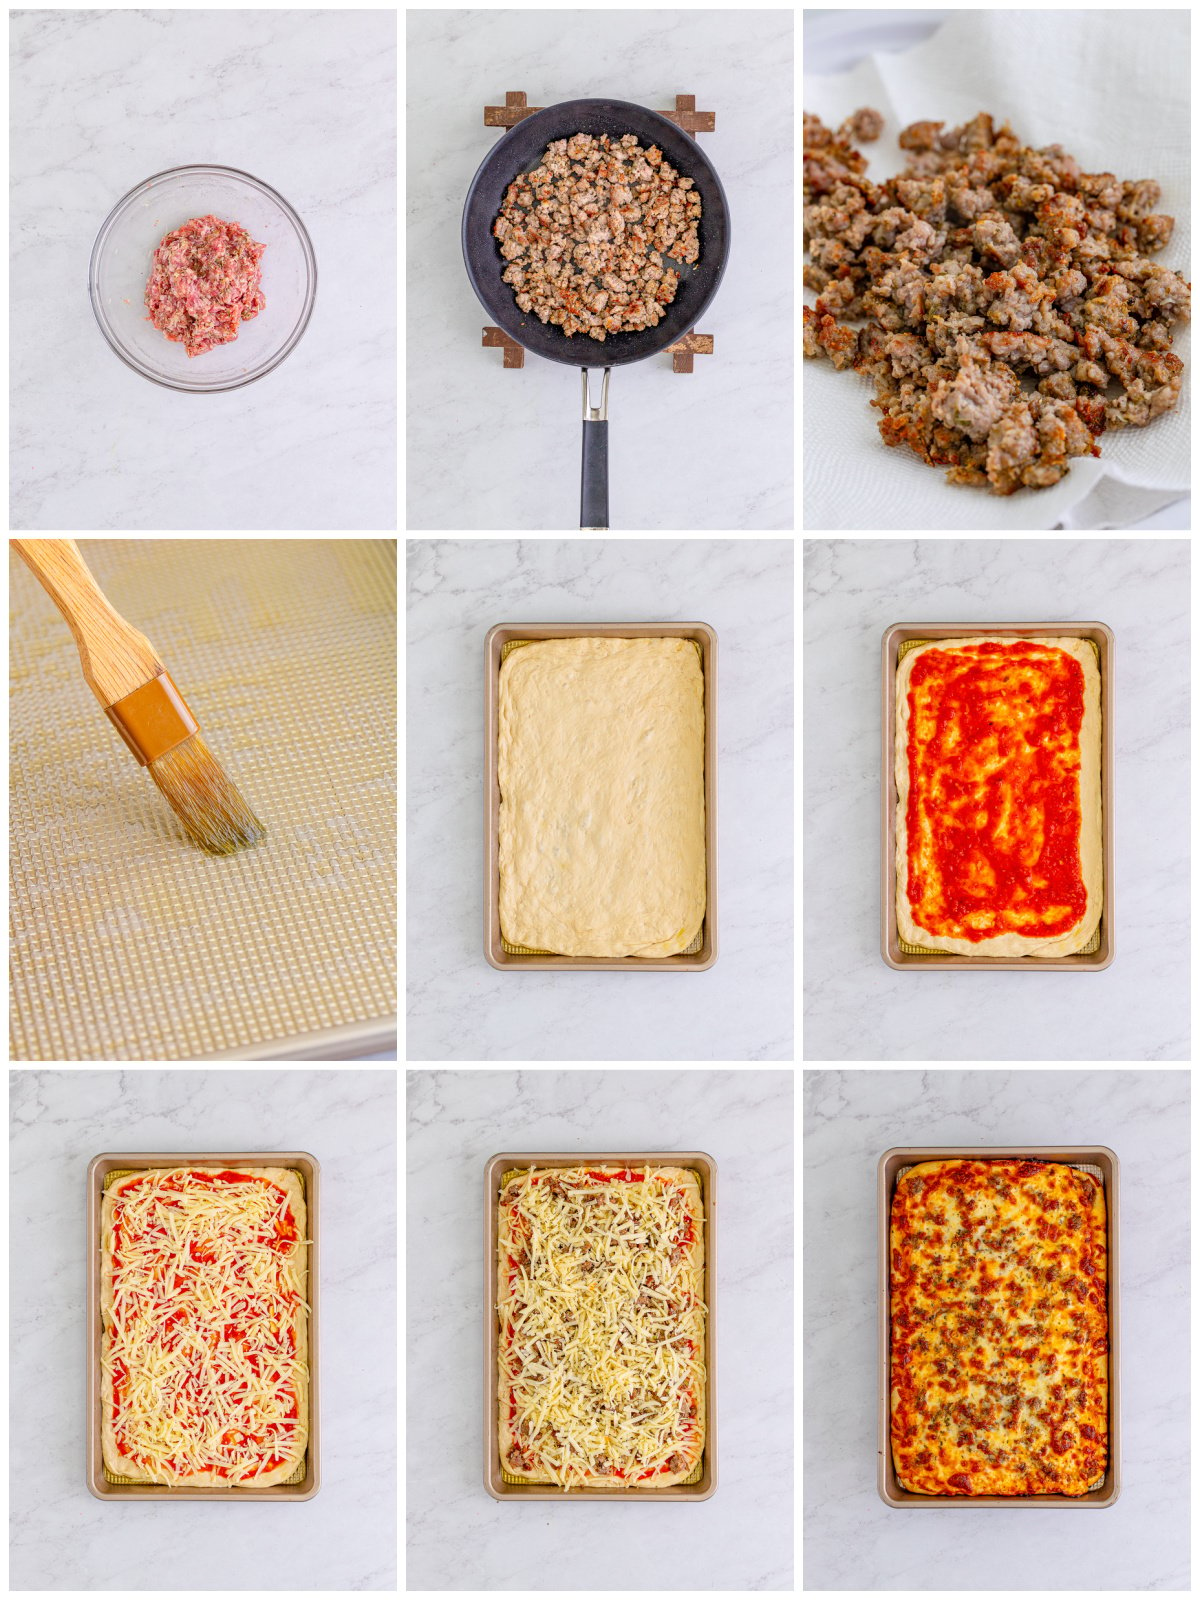 Step by step photos on how to make a Sheet Pan Pizza.